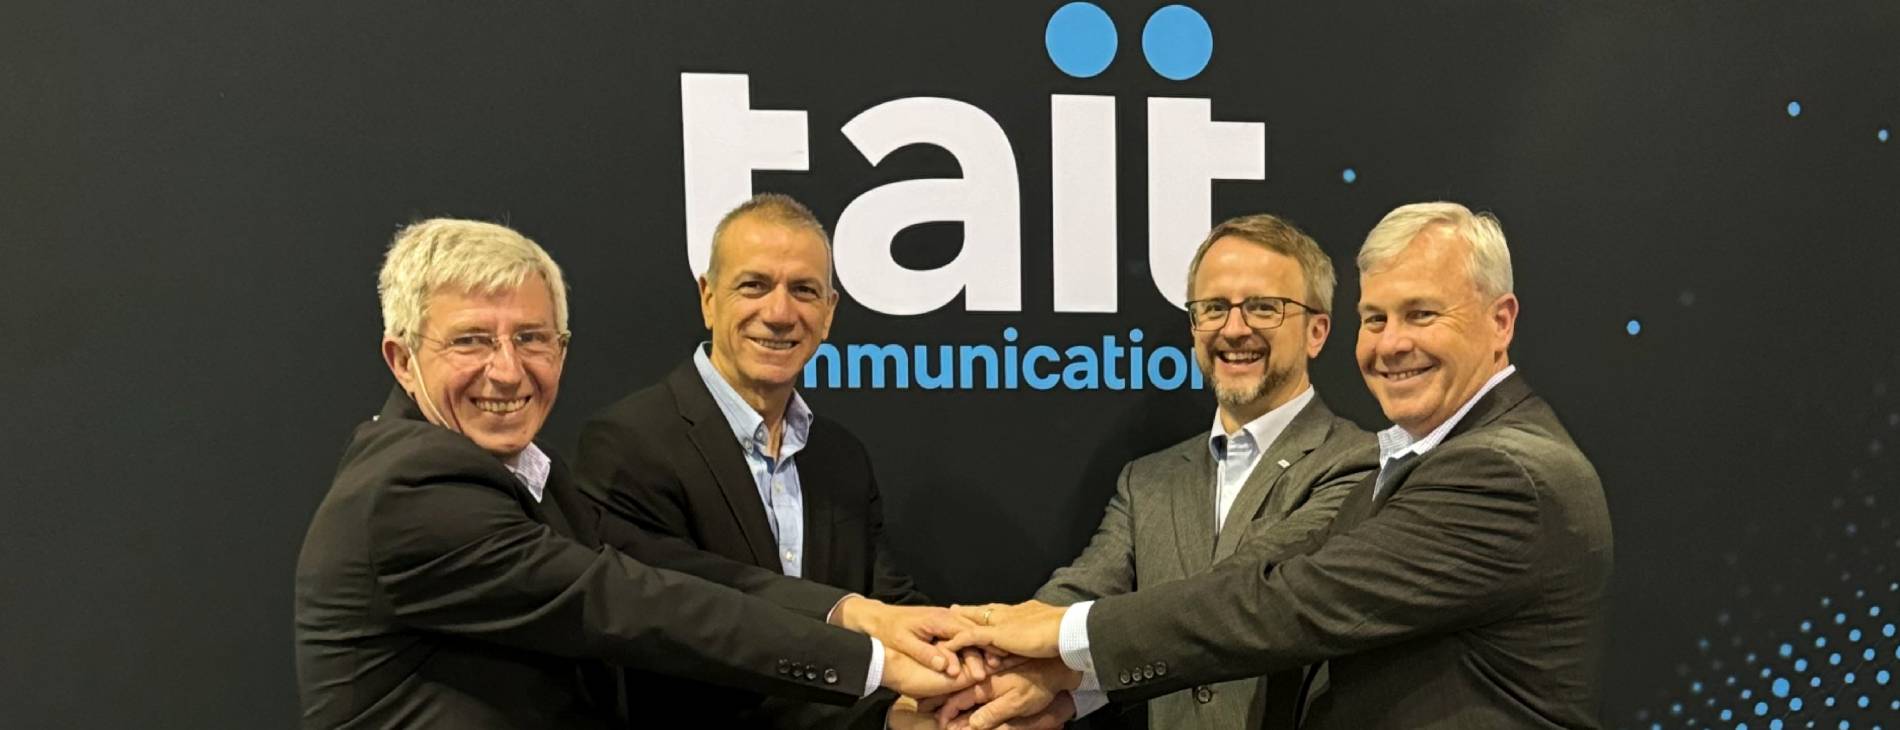 Four business men from Frequentis and Tait shaking hands